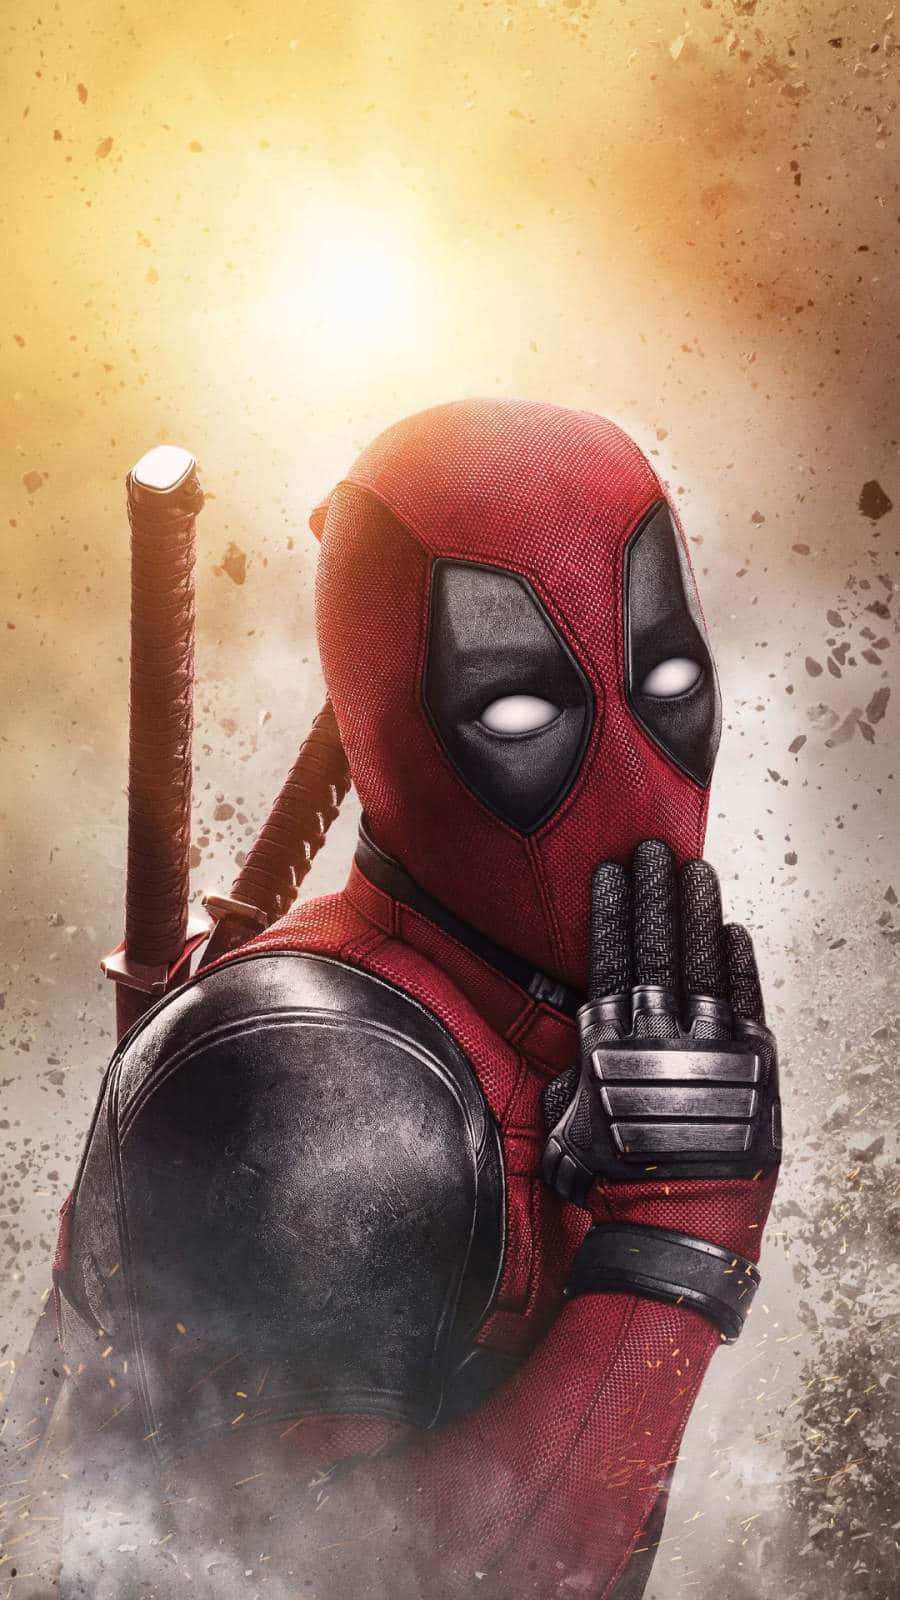 Embrace the comic book life in style with the Deadpool iPhone Wallpaper